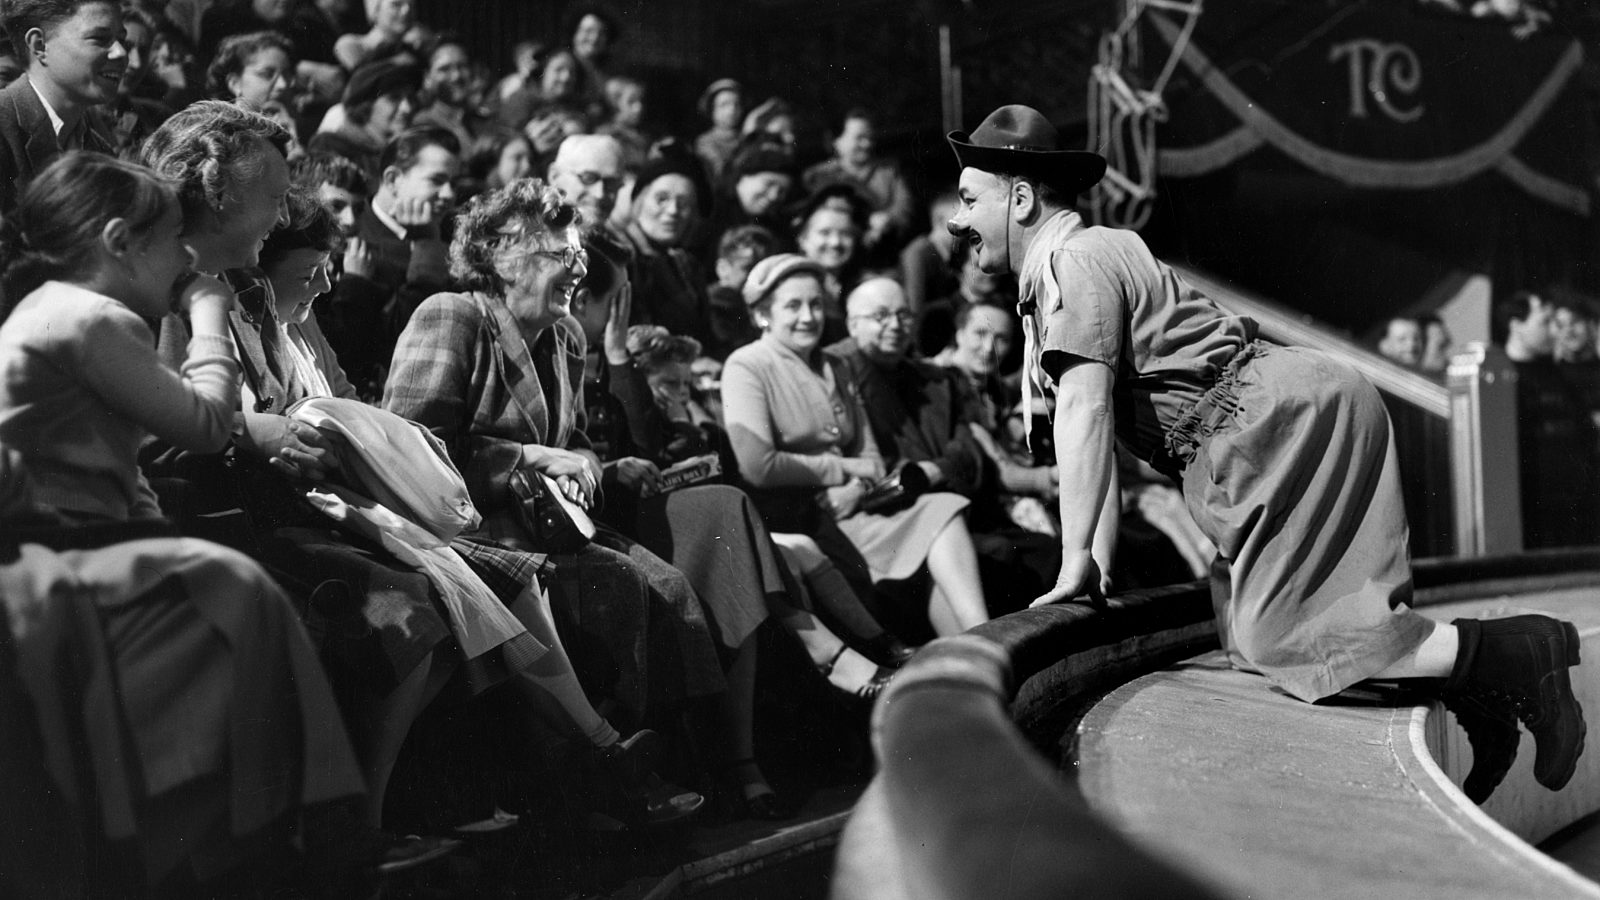 Black and white photograph of Charlie Cairoli leaning into the circus audience